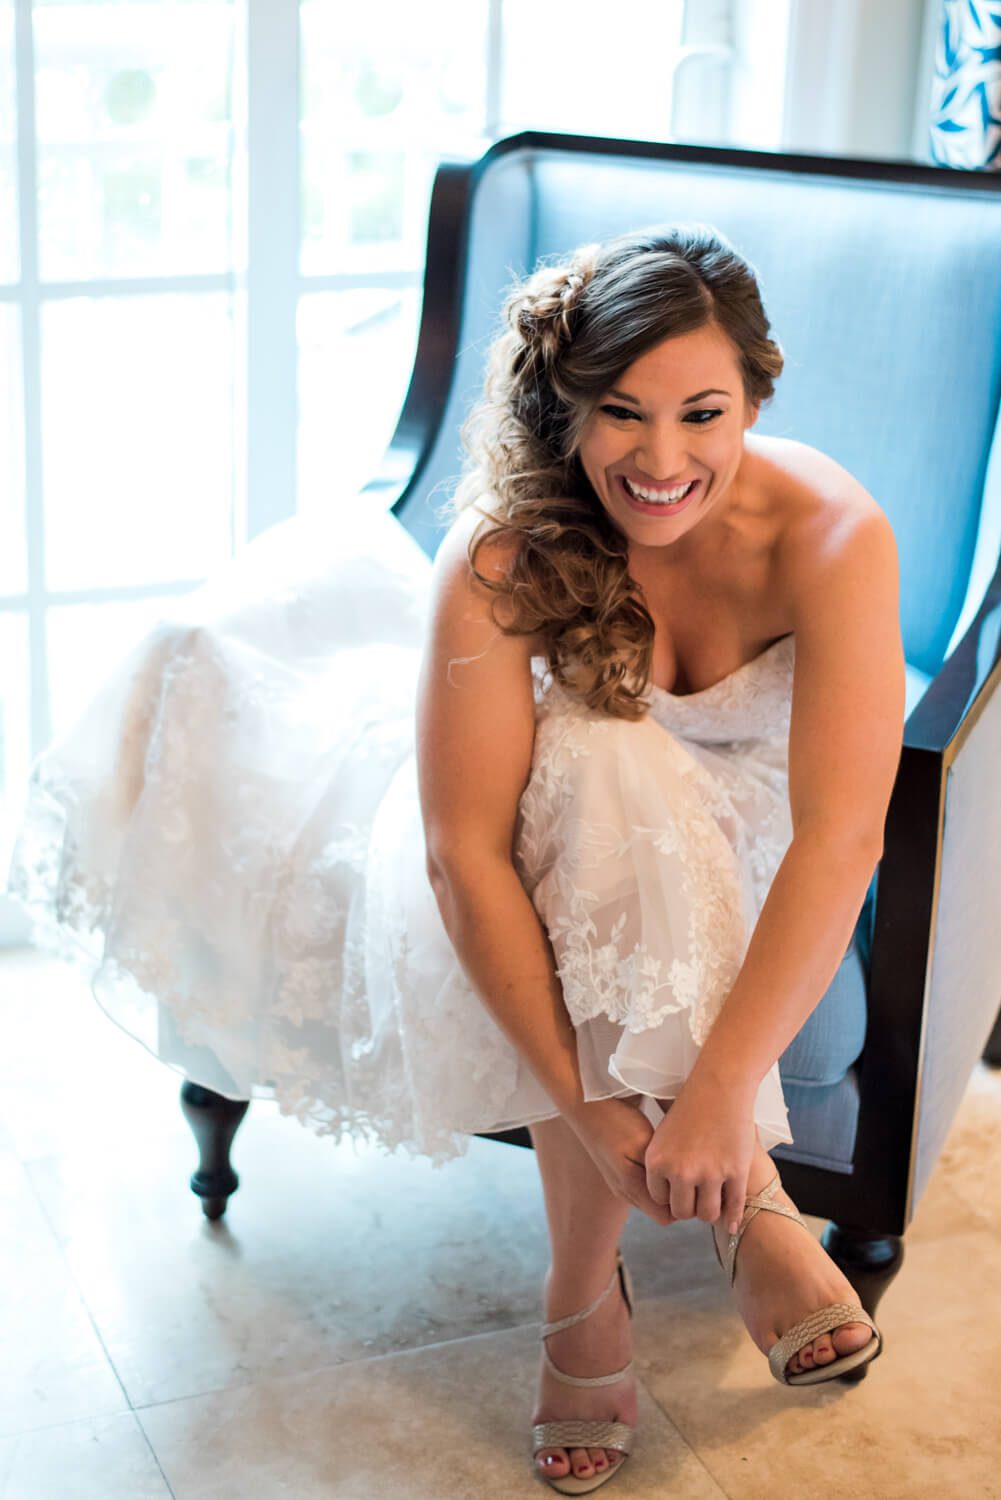 A bride sitting on a chair in her wedding dress captured by Key West Wedding Photographer - Freas Photography.